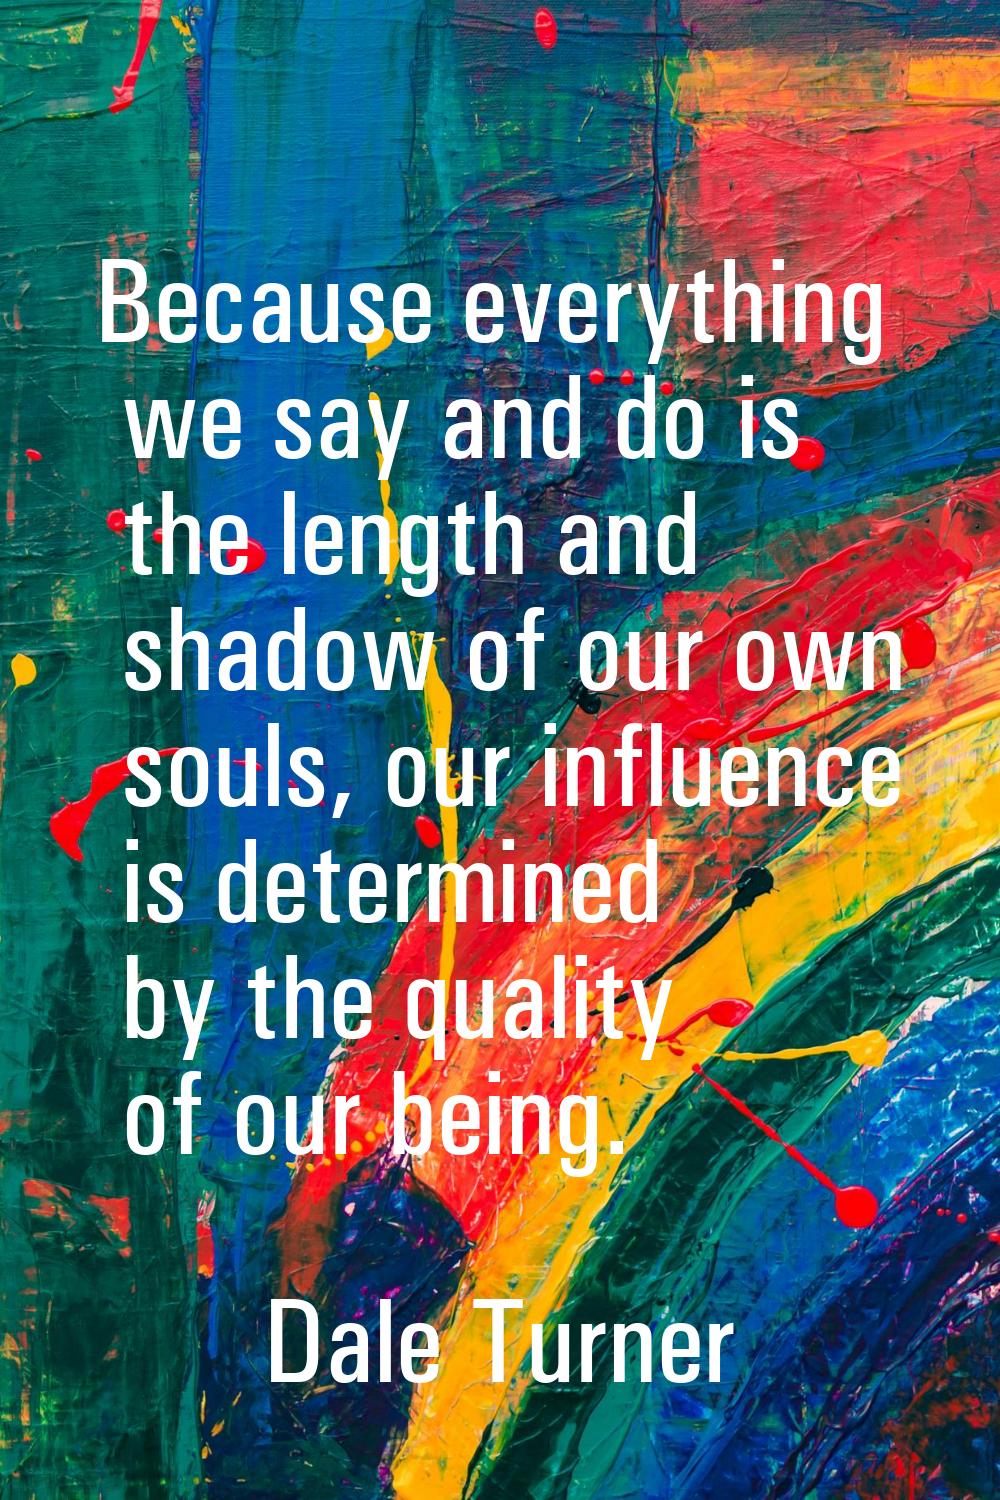 Because everything we say and do is the length and shadow of our own souls, our influence is determ